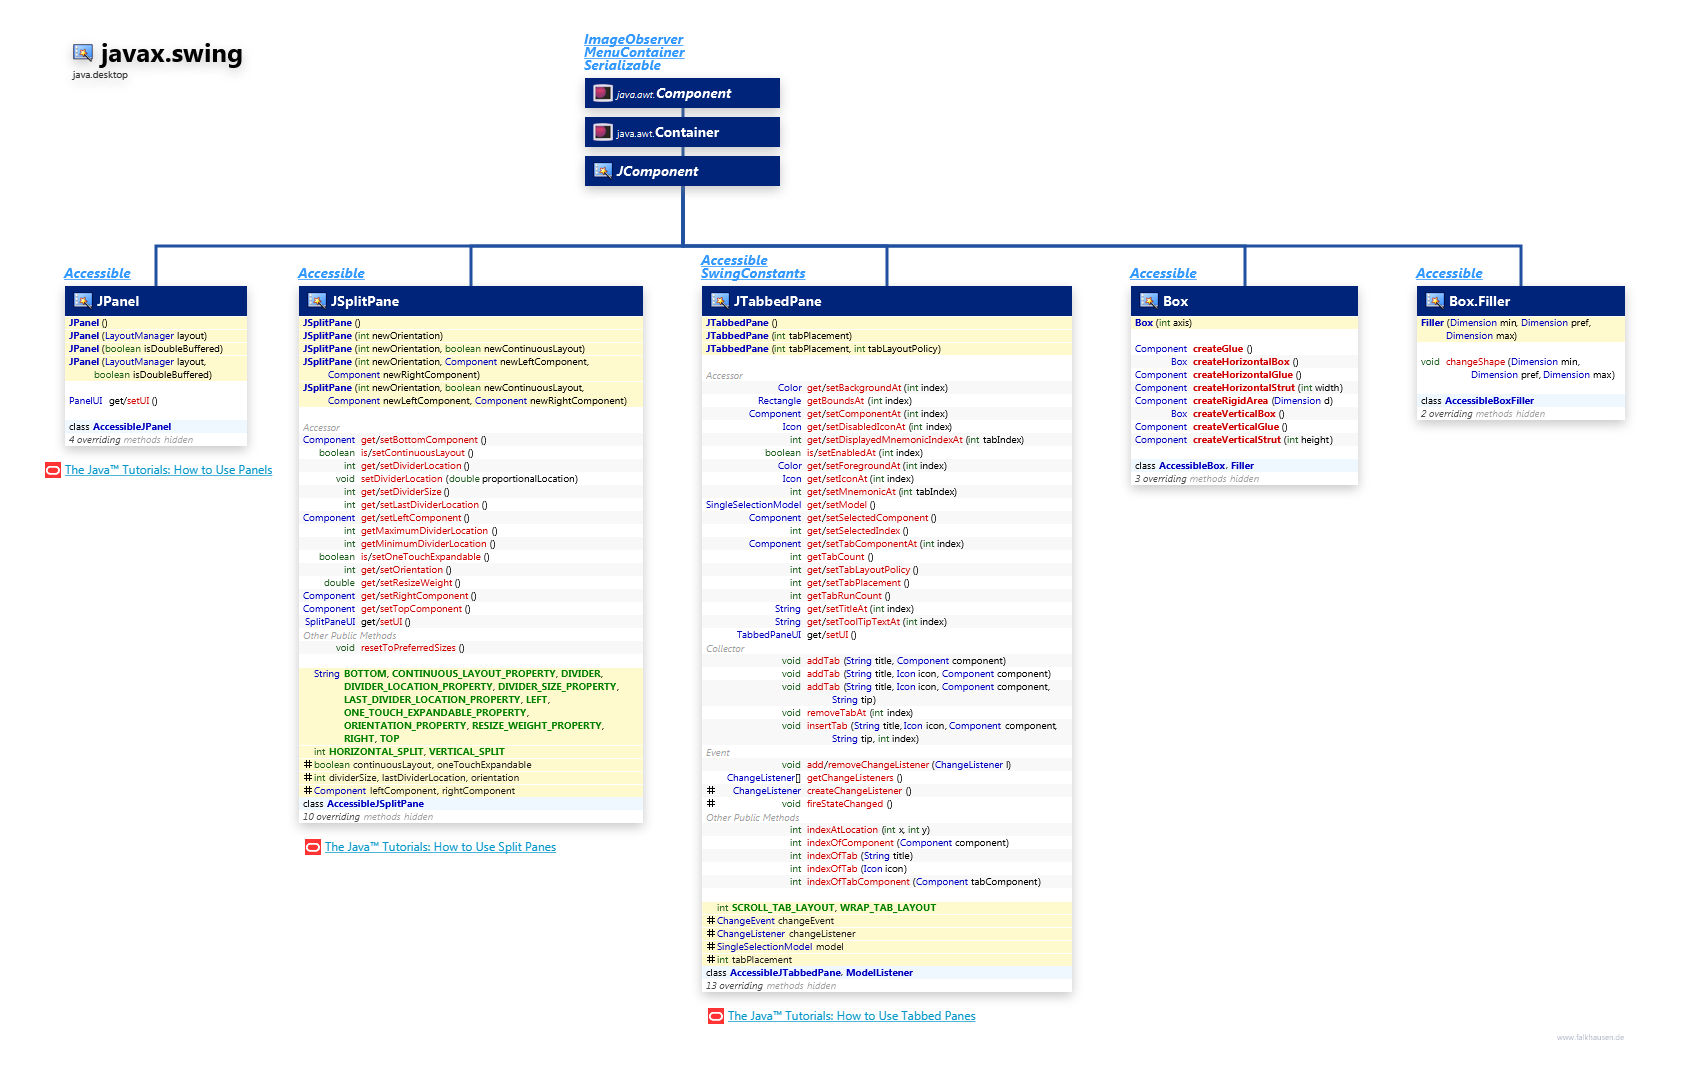 javax.swing Panes class diagram and api documentation for Java 10